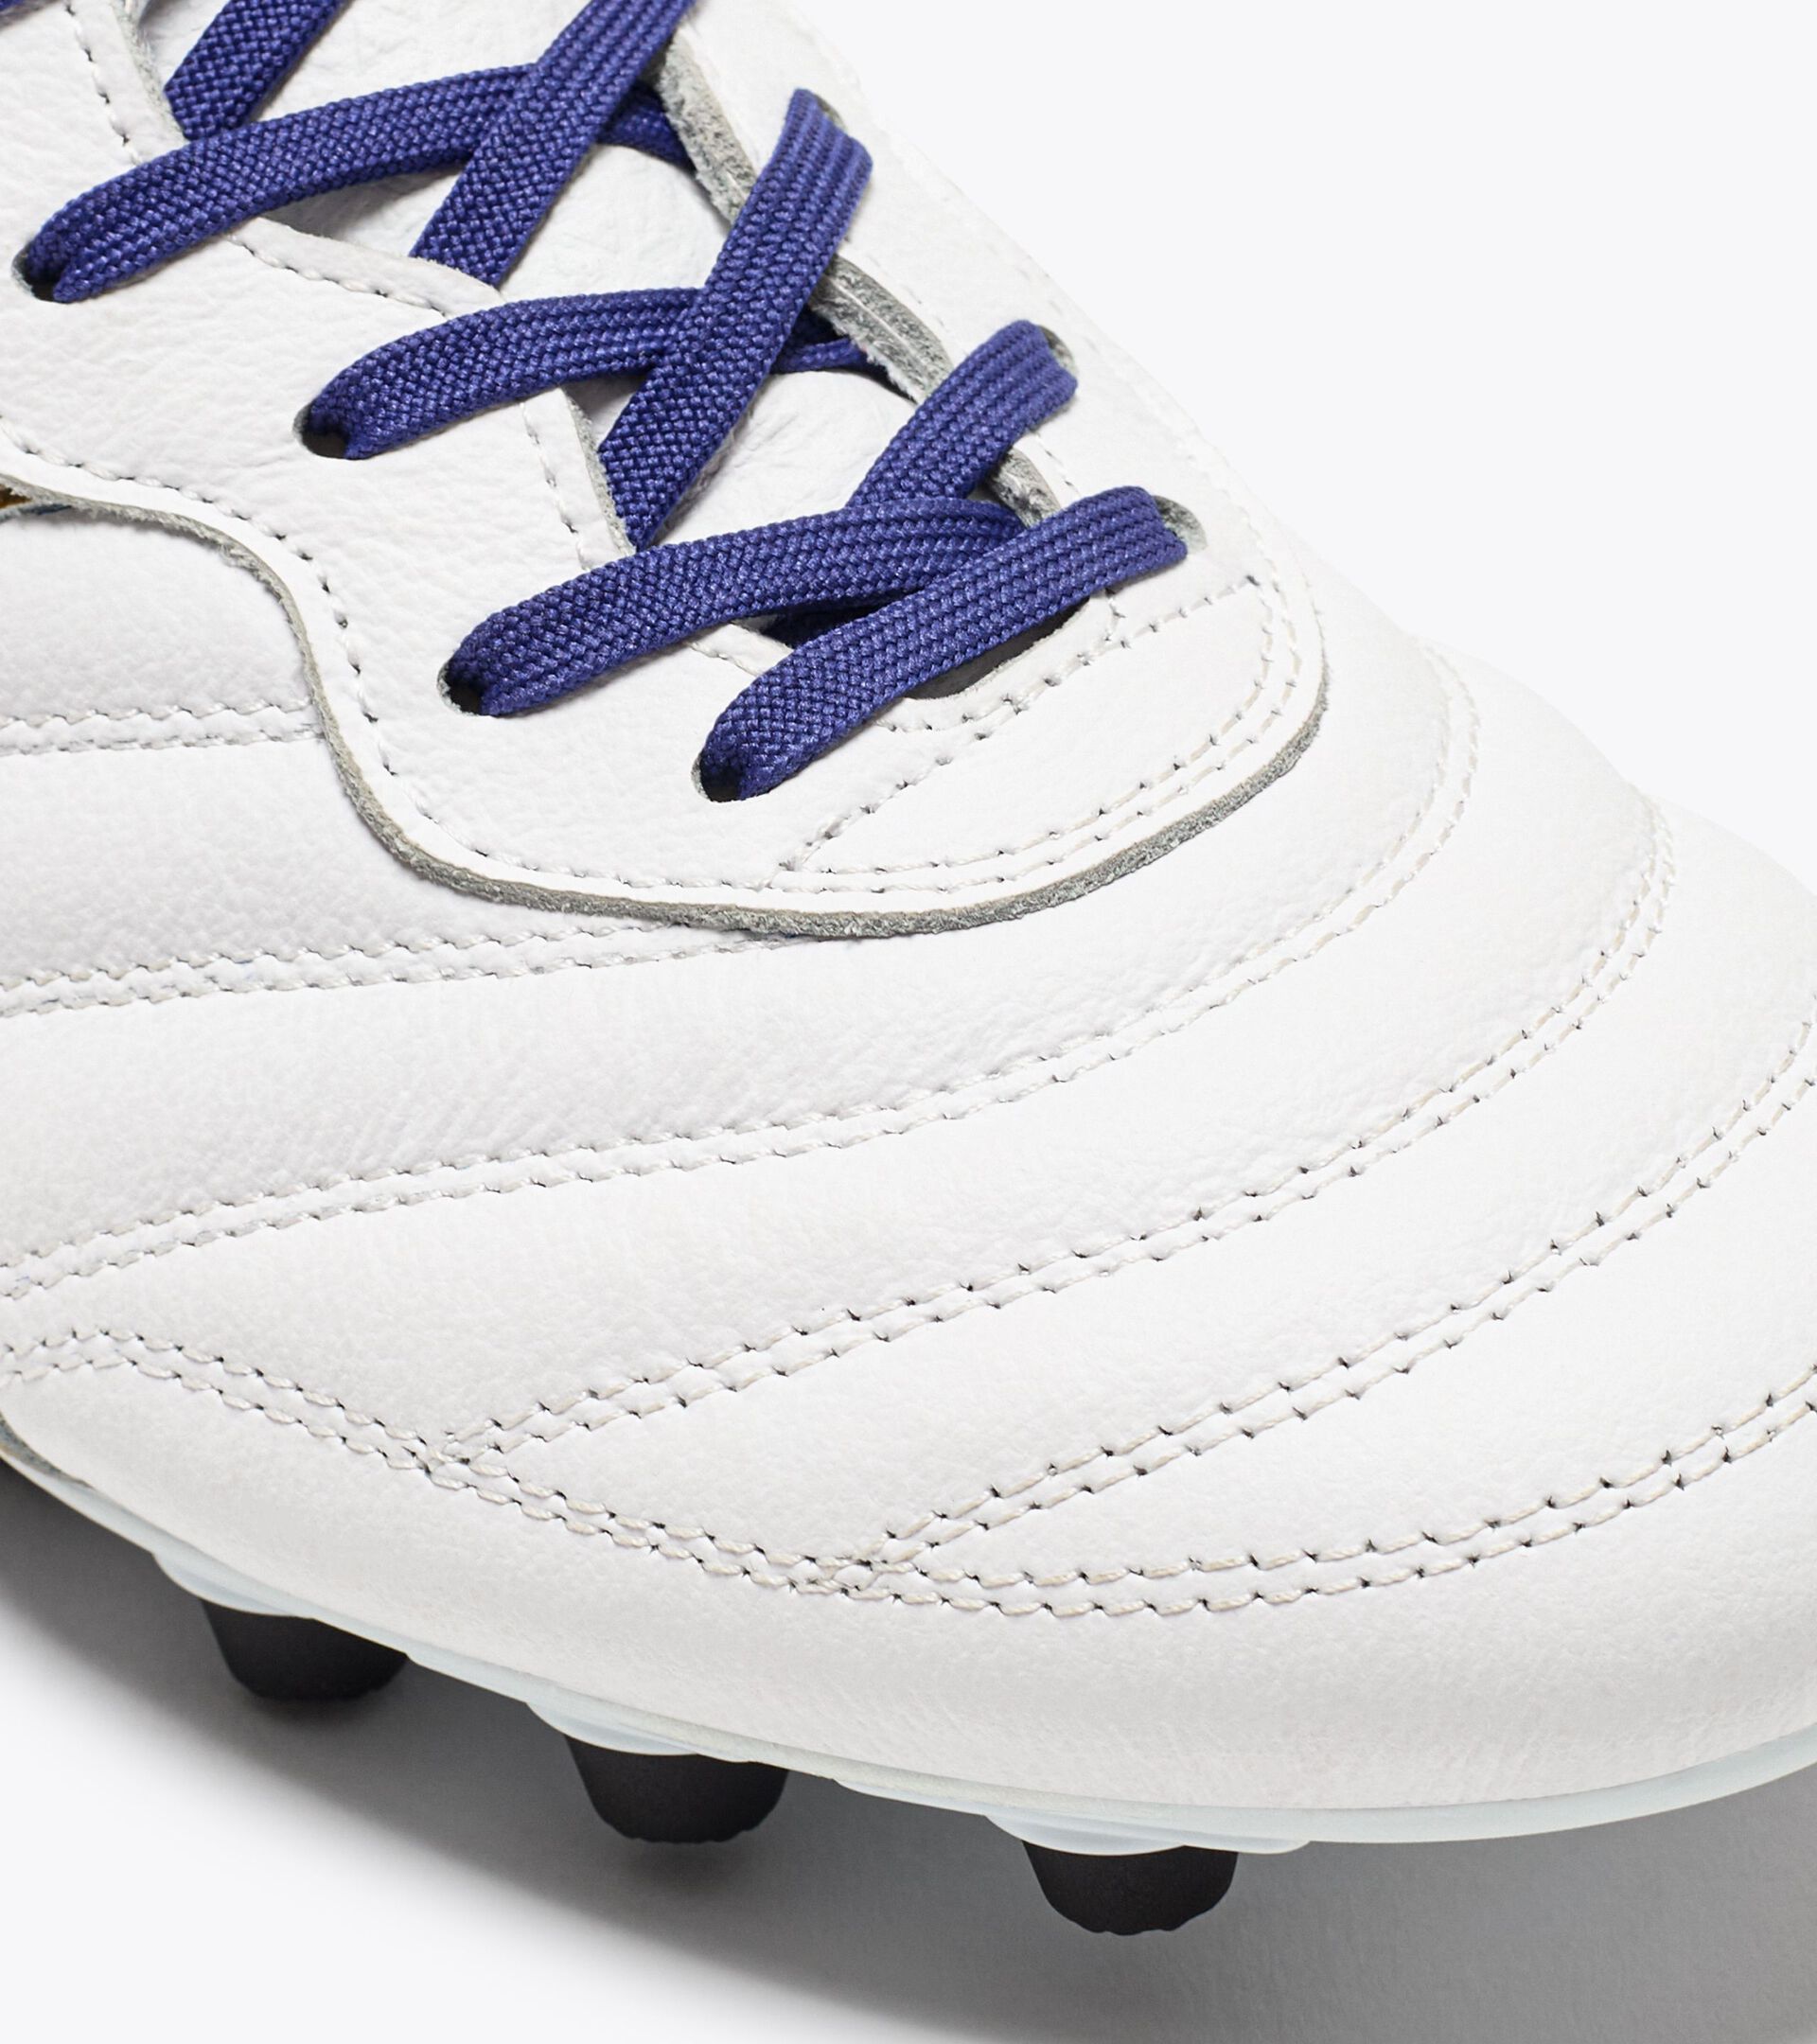 Calcio boots for firm grounds - Made in Italy - Gender Neutral BRASIL ITALY OG GR LT+  MDPU WHITE/MAZARINE BLUE/GOLD - Diadora